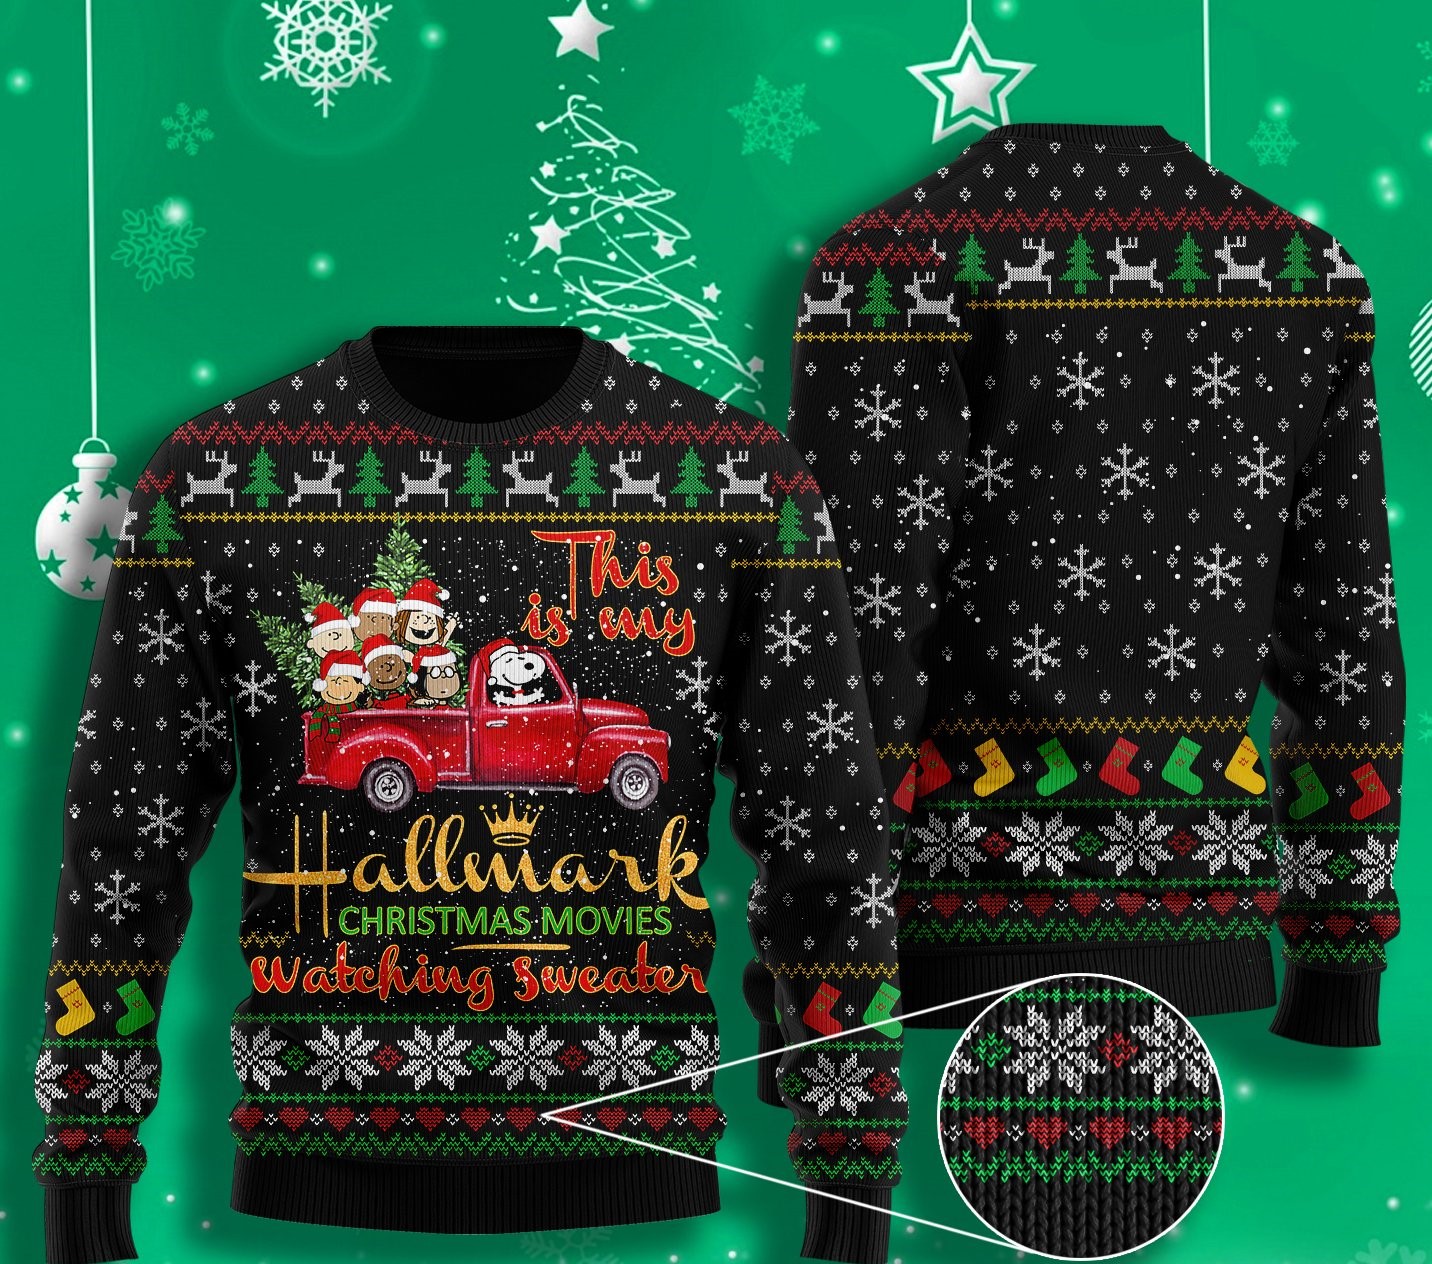 snoopy this is my hallmark christmas movie watching ugly christmas sweater 2